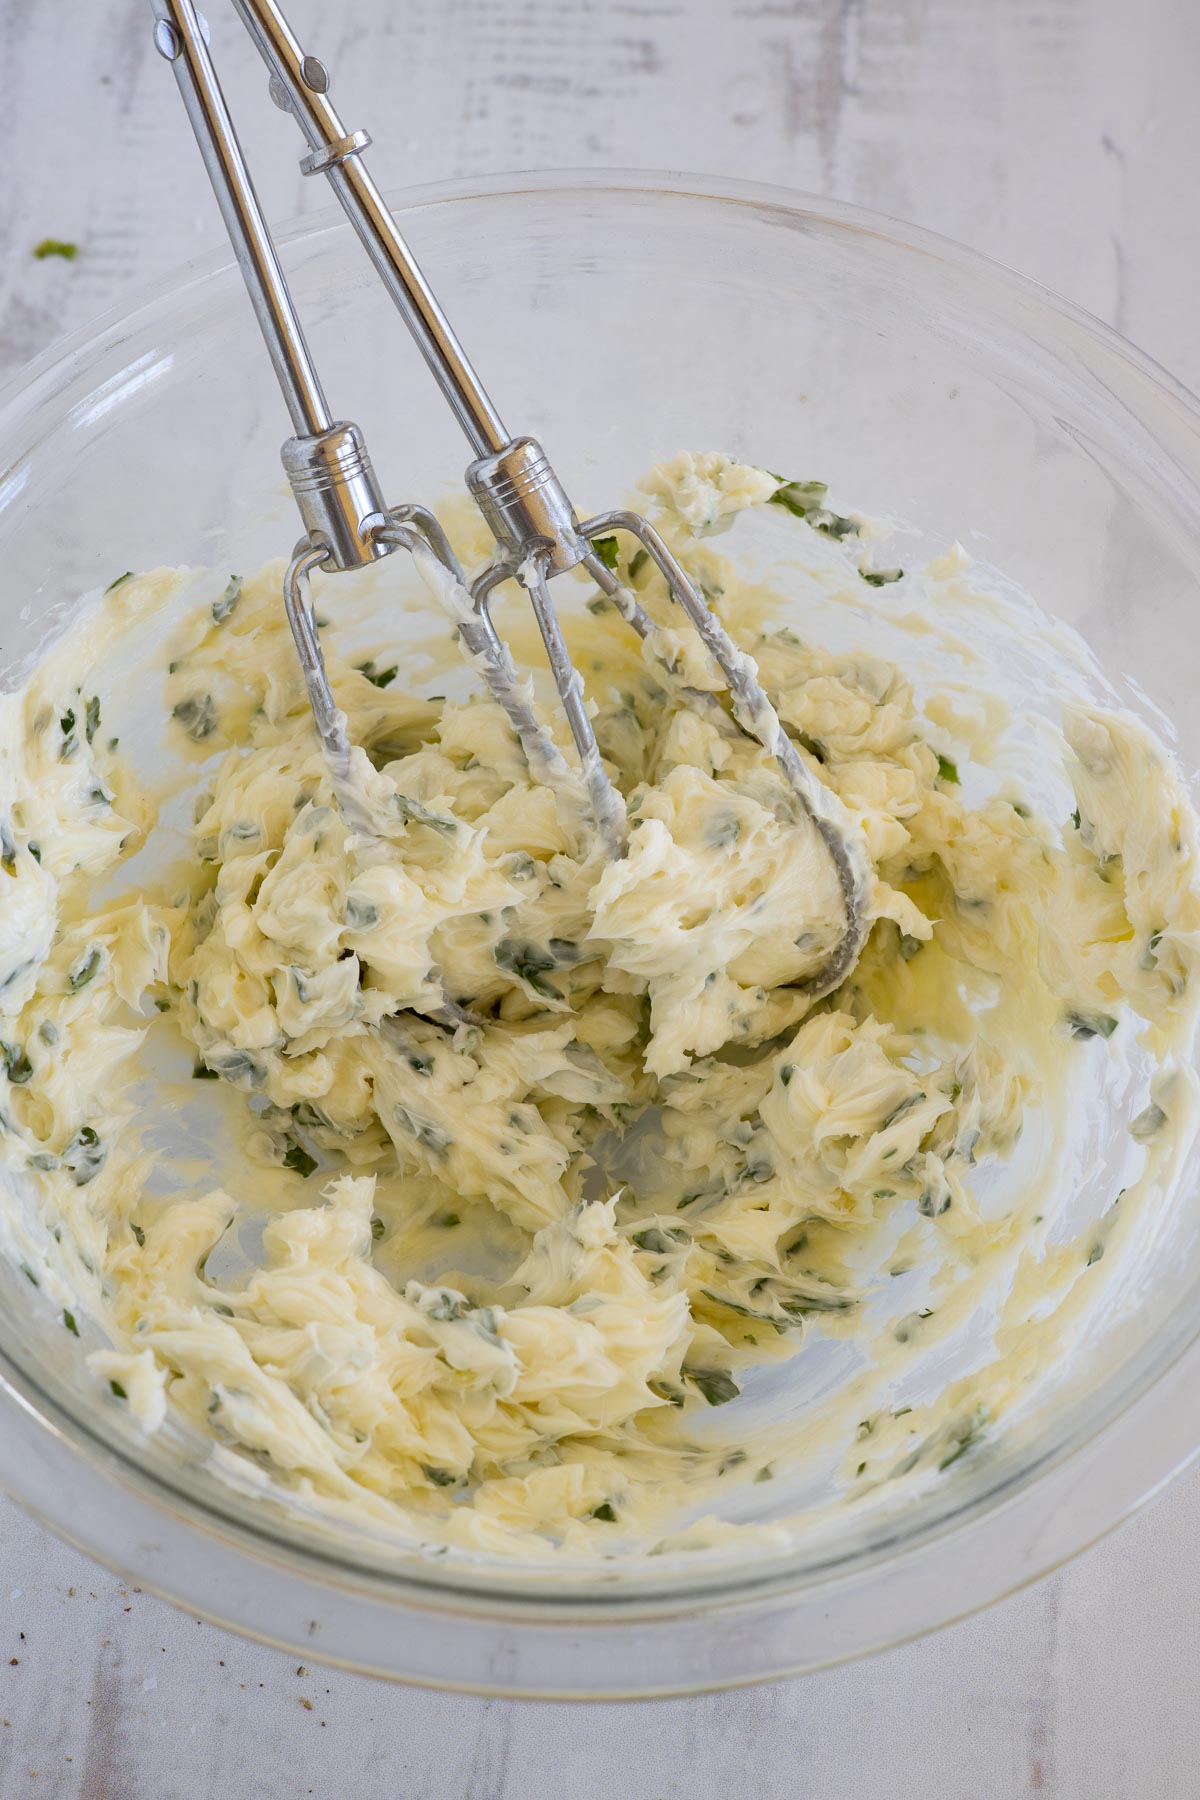 Mixed herb butter in a bowl with beaters.